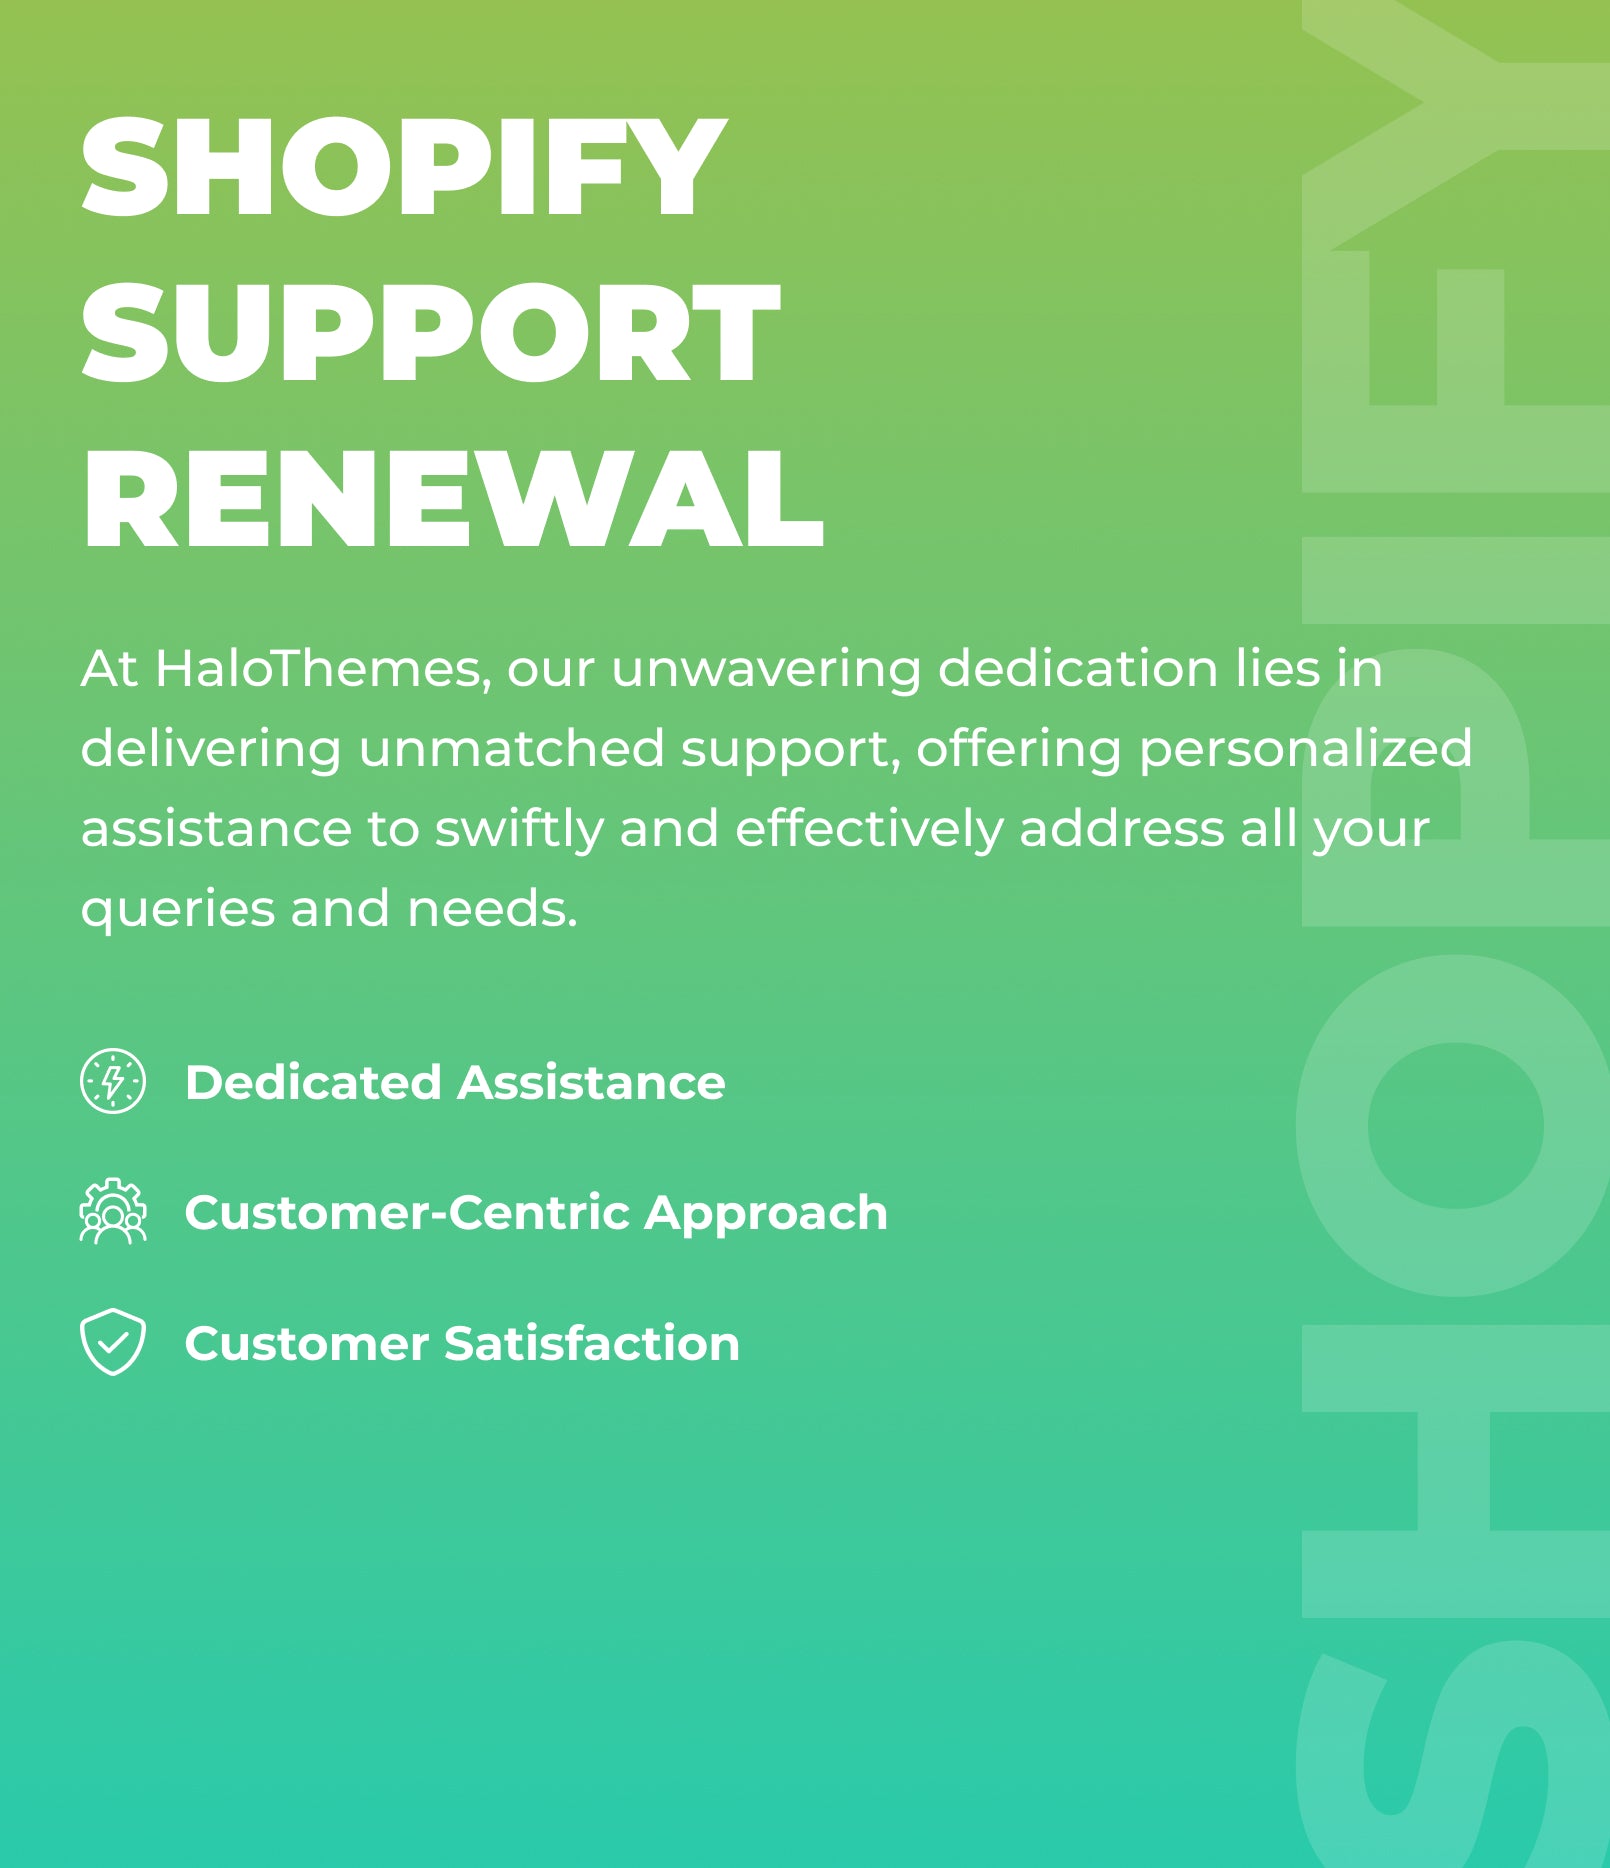 Shopify Support Renewal | Enhance Your Experience with HaloThemes Support Services